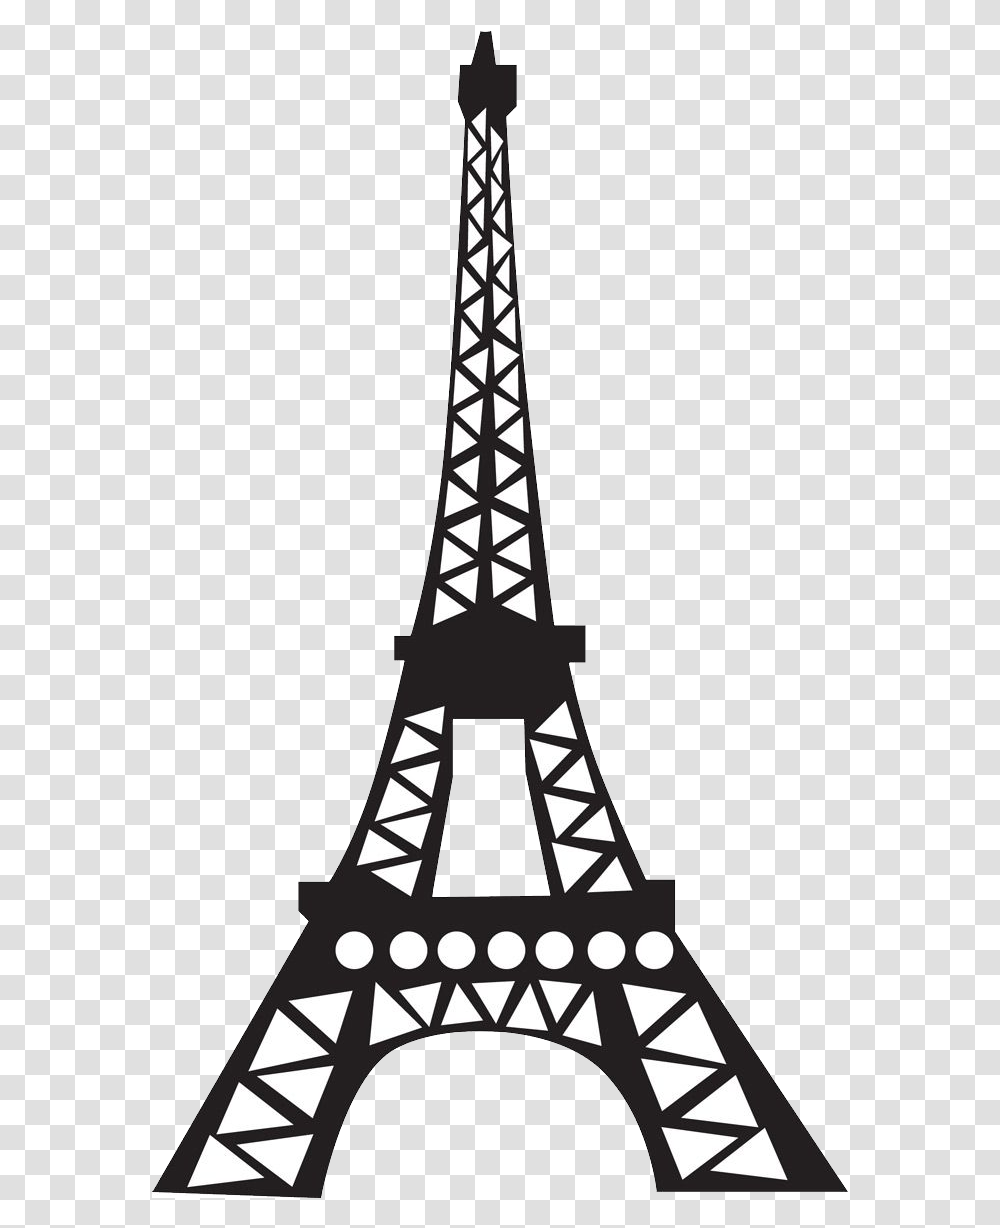 Eiffel Tower Images Free Download, Cable, Construction Crane, Machine, Electric Transmission Tower Transparent Png